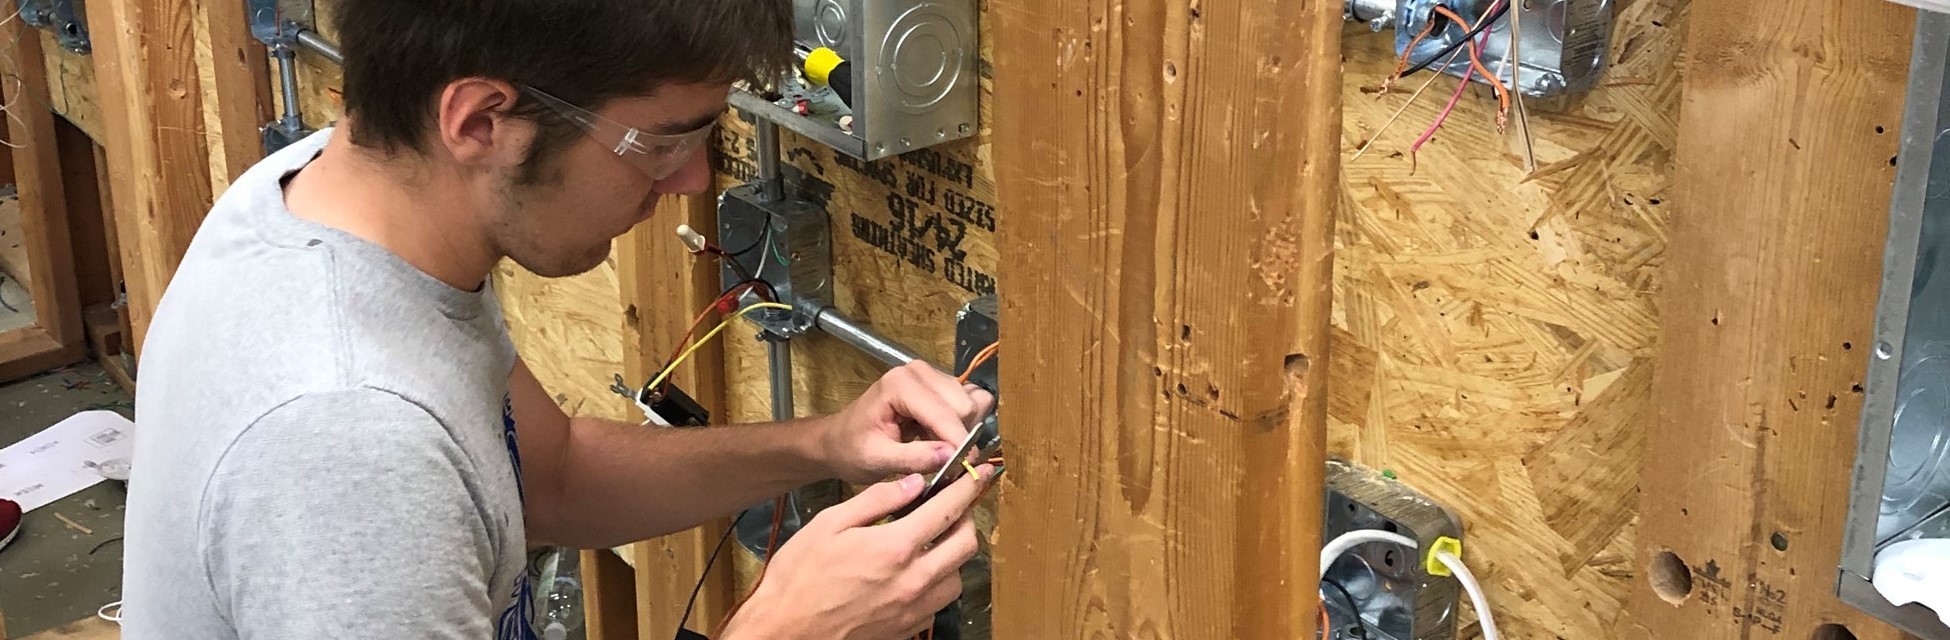 Student wiring in electrical technology class